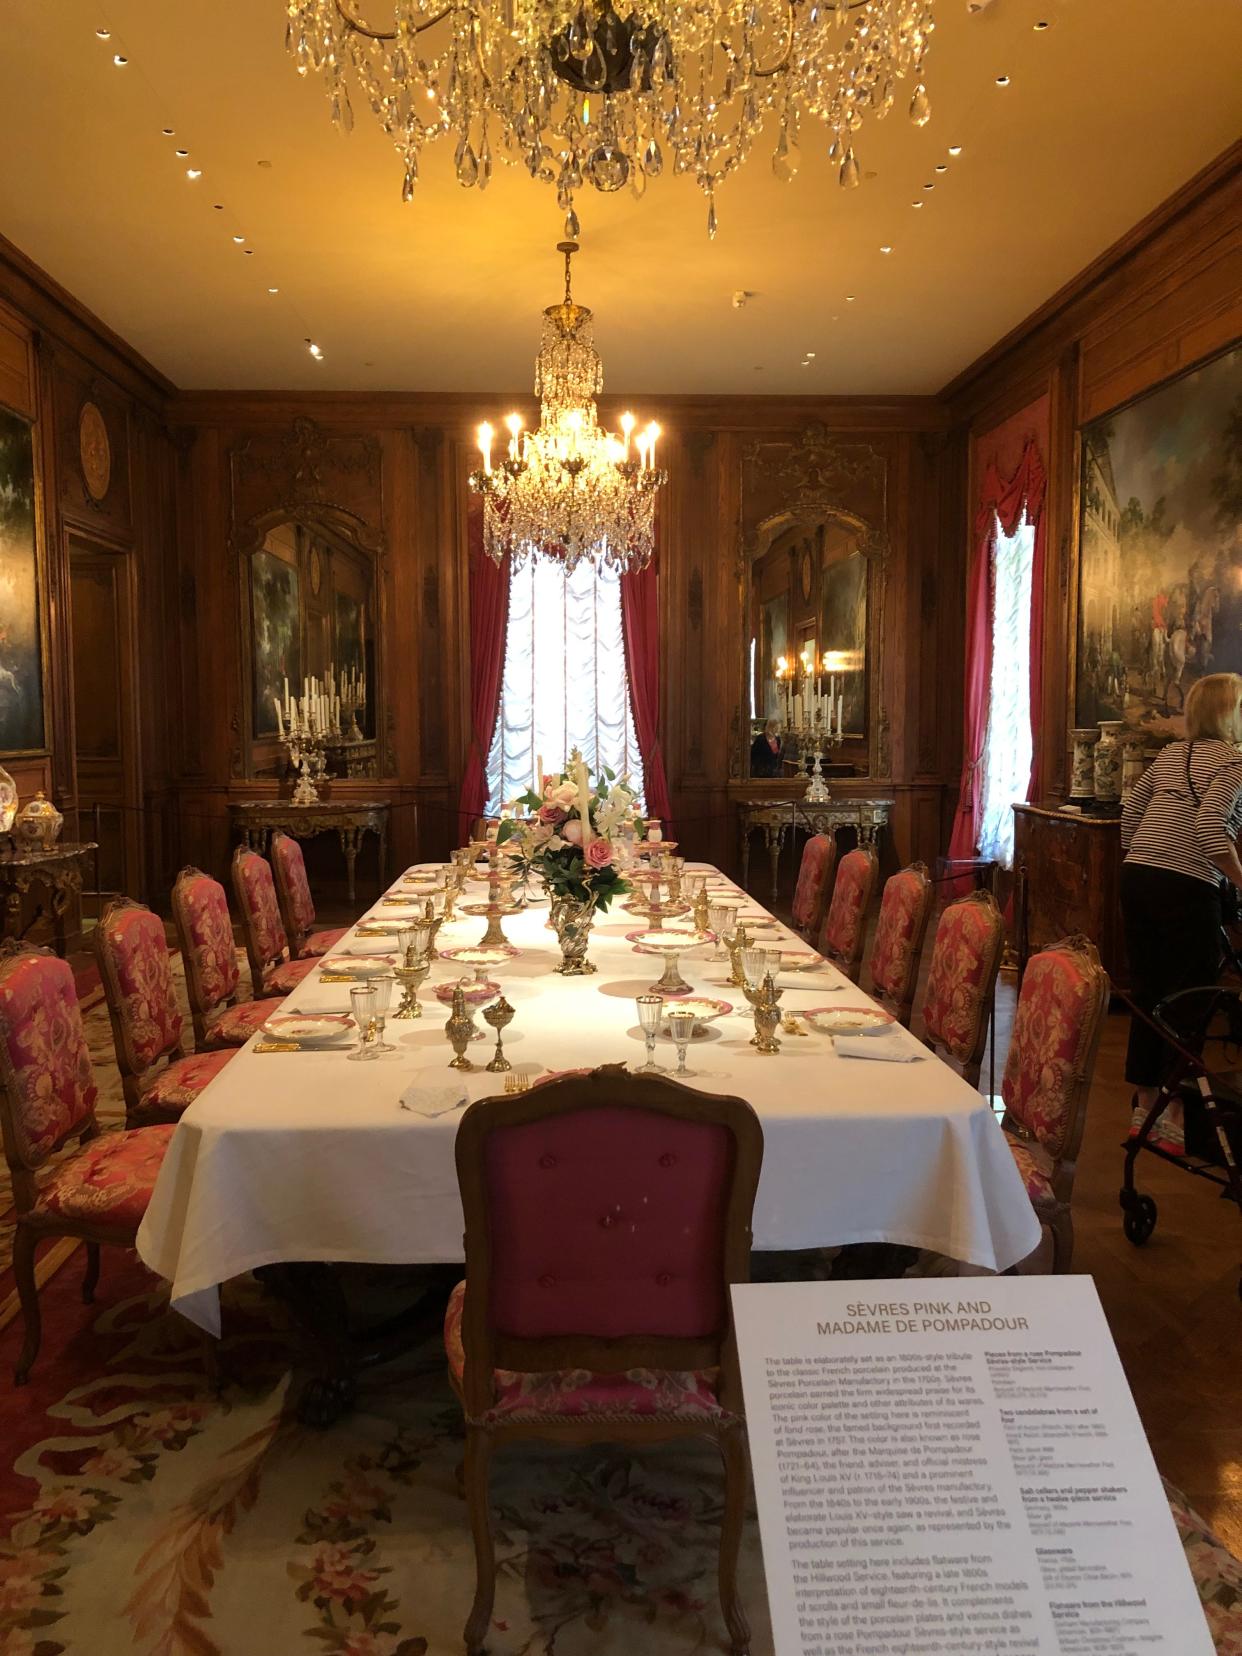 The dining room at Hillwood is a showcase for the magnificent dining table, designed by Joseph Urban, as well as pieces from Marjorie Merriweather Post's extensive tableware collection.